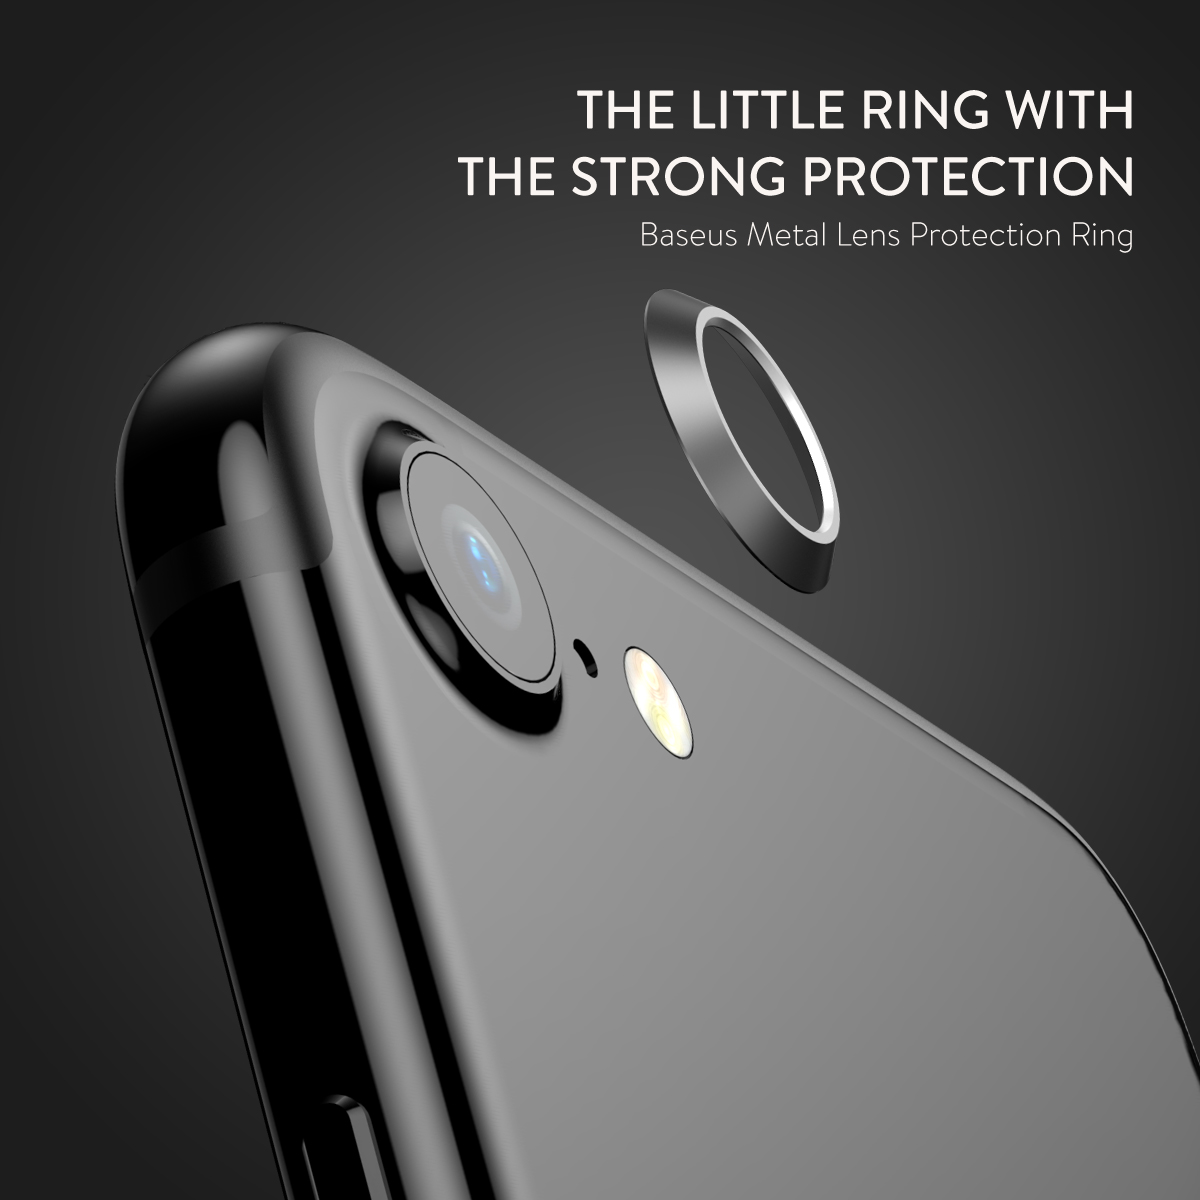 Baseus-Metal-Lens-Protection-Ring-Anti-scratch-Rear-Camera-Lens-Circle-Protector-for-iPhone-7-1131159-1